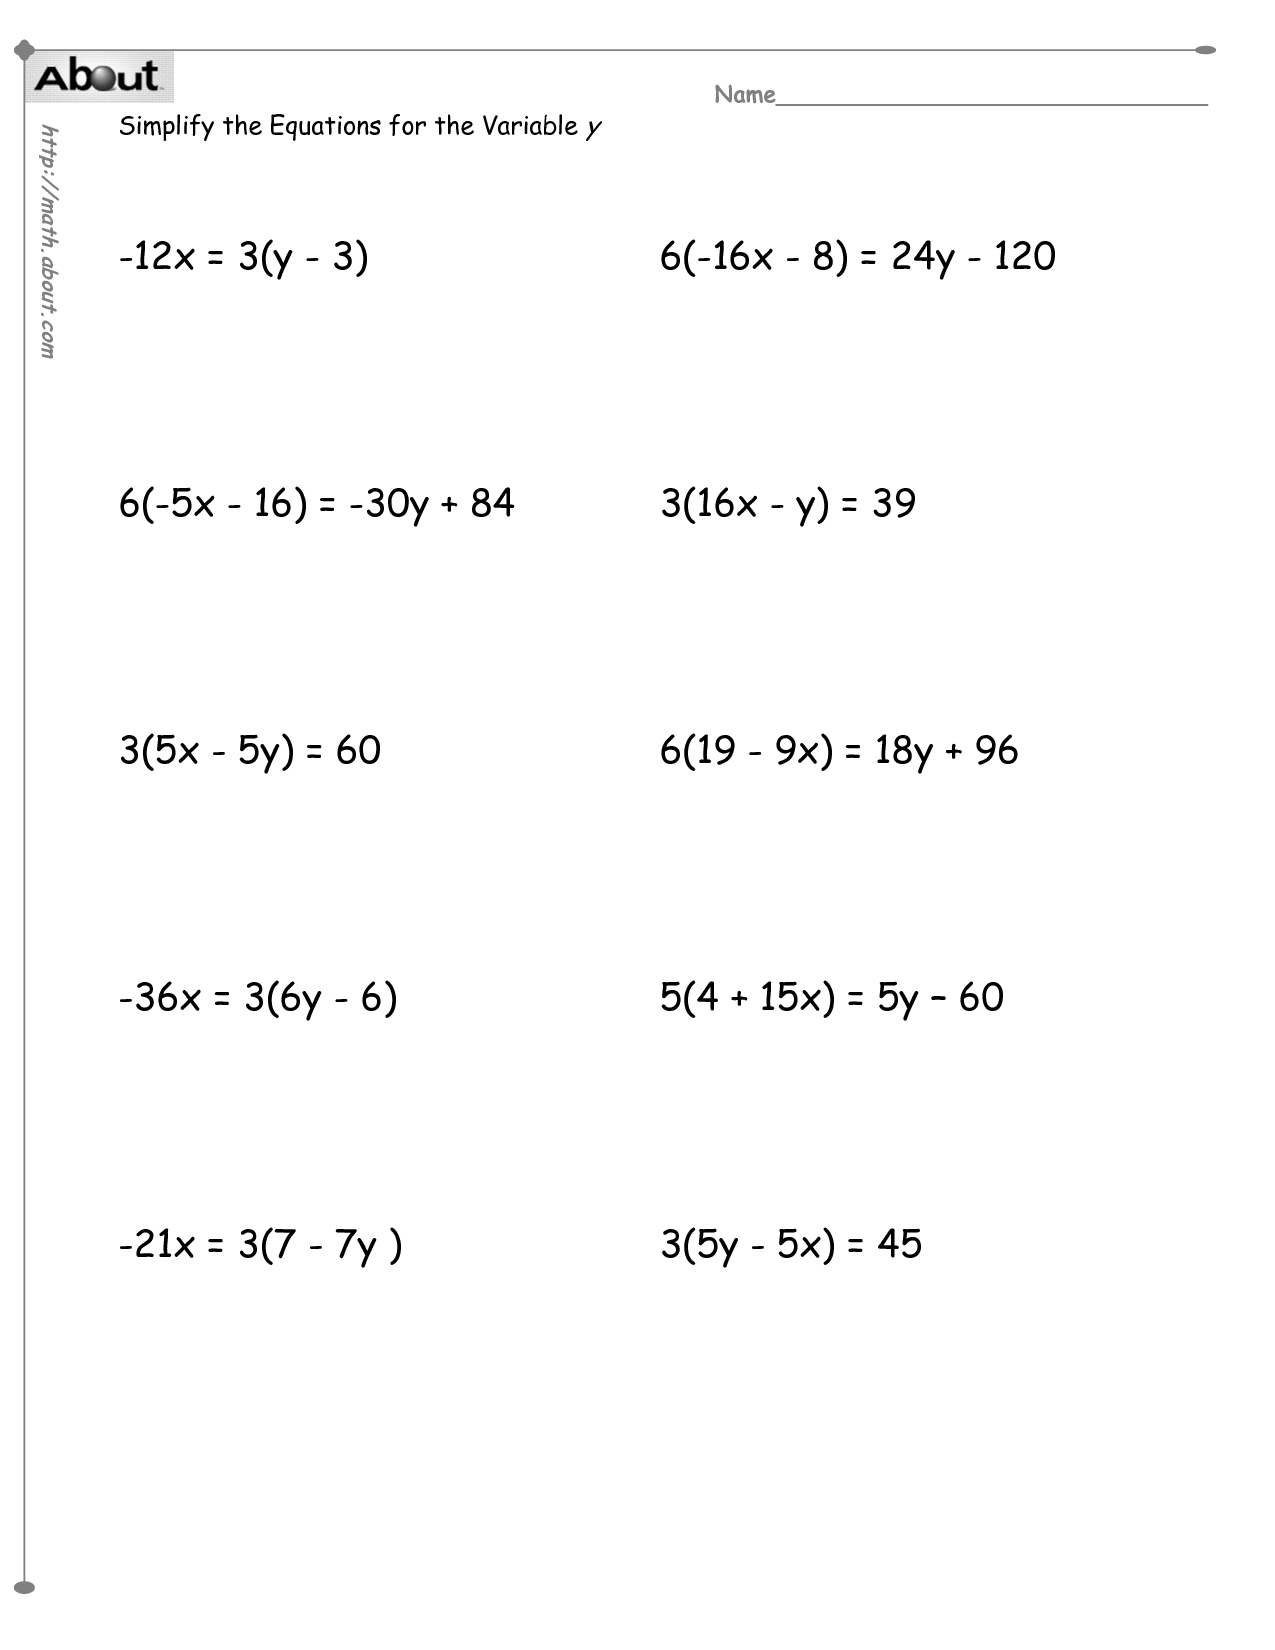 math-worksheets-solving-equations-with-variables-2-1-solving-multi